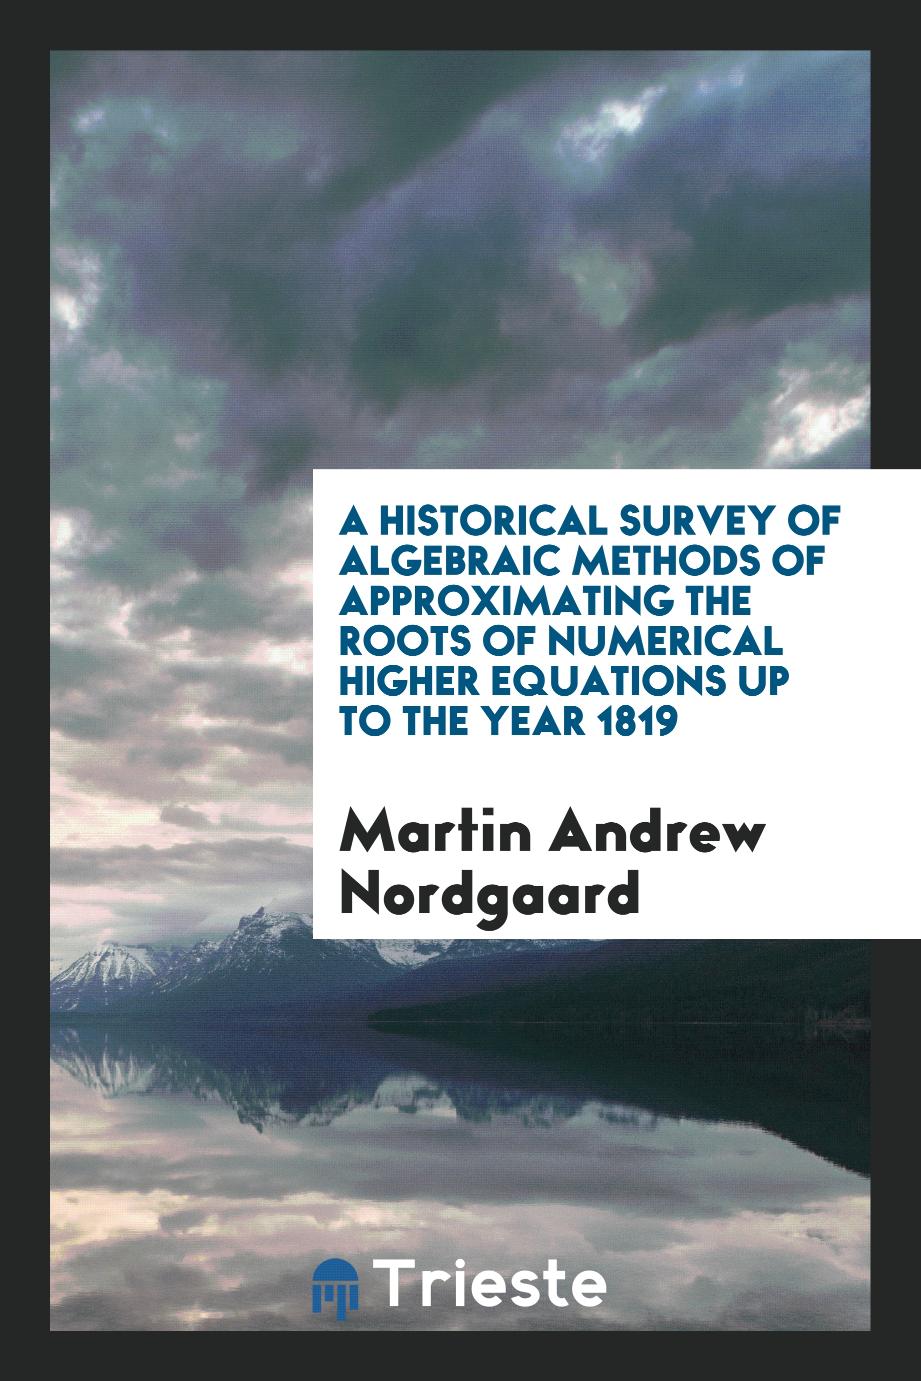 A Historical Survey of Algebraic Methods of Approximating the Roots of Numerical Higher Equations up to the Year 1819